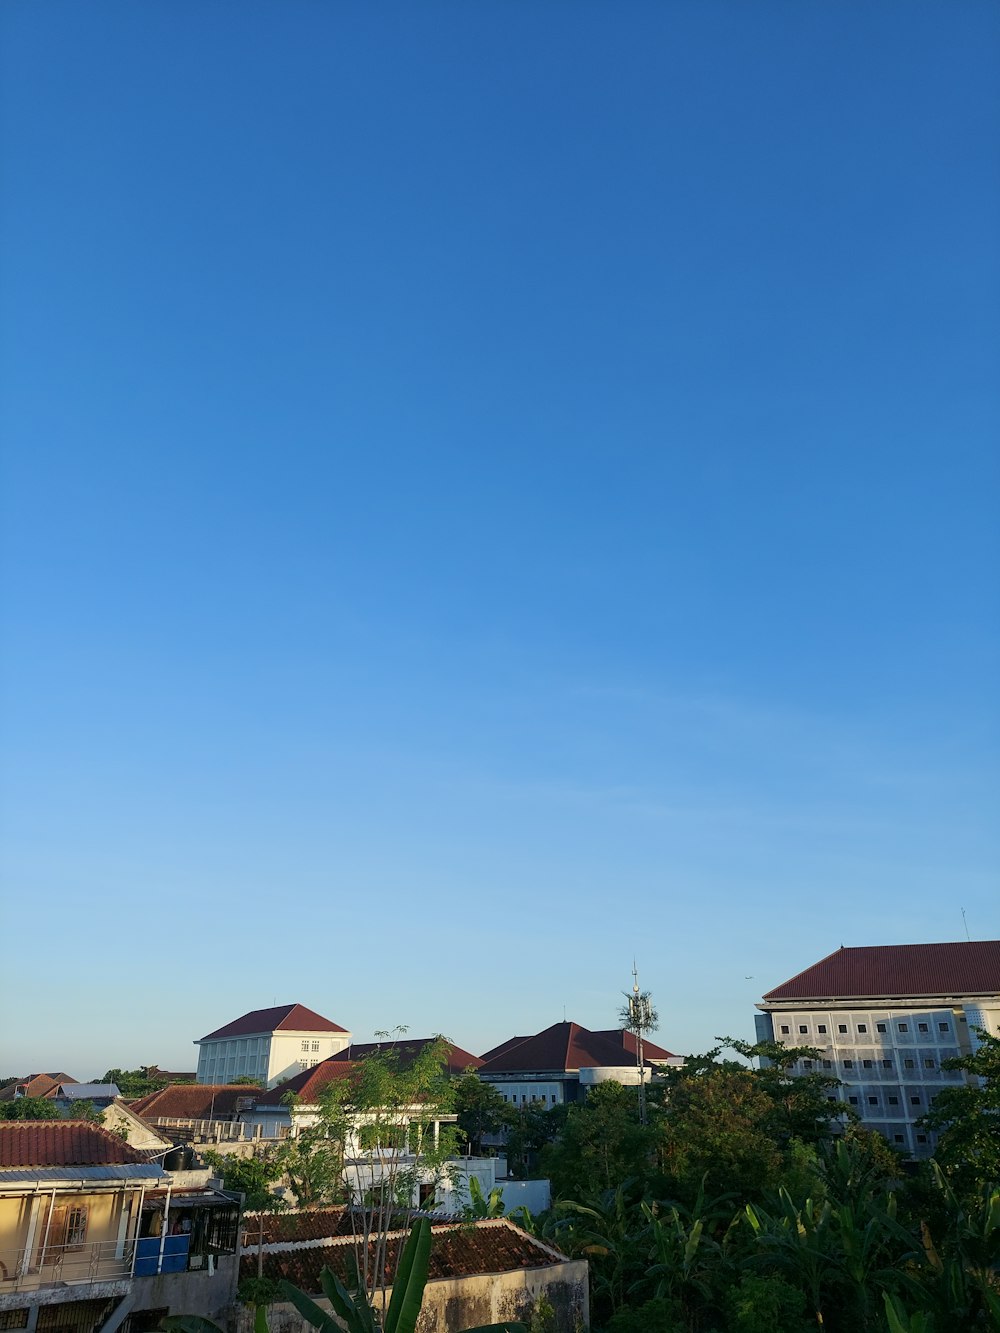 a clear blue sky with a few buildings in the background